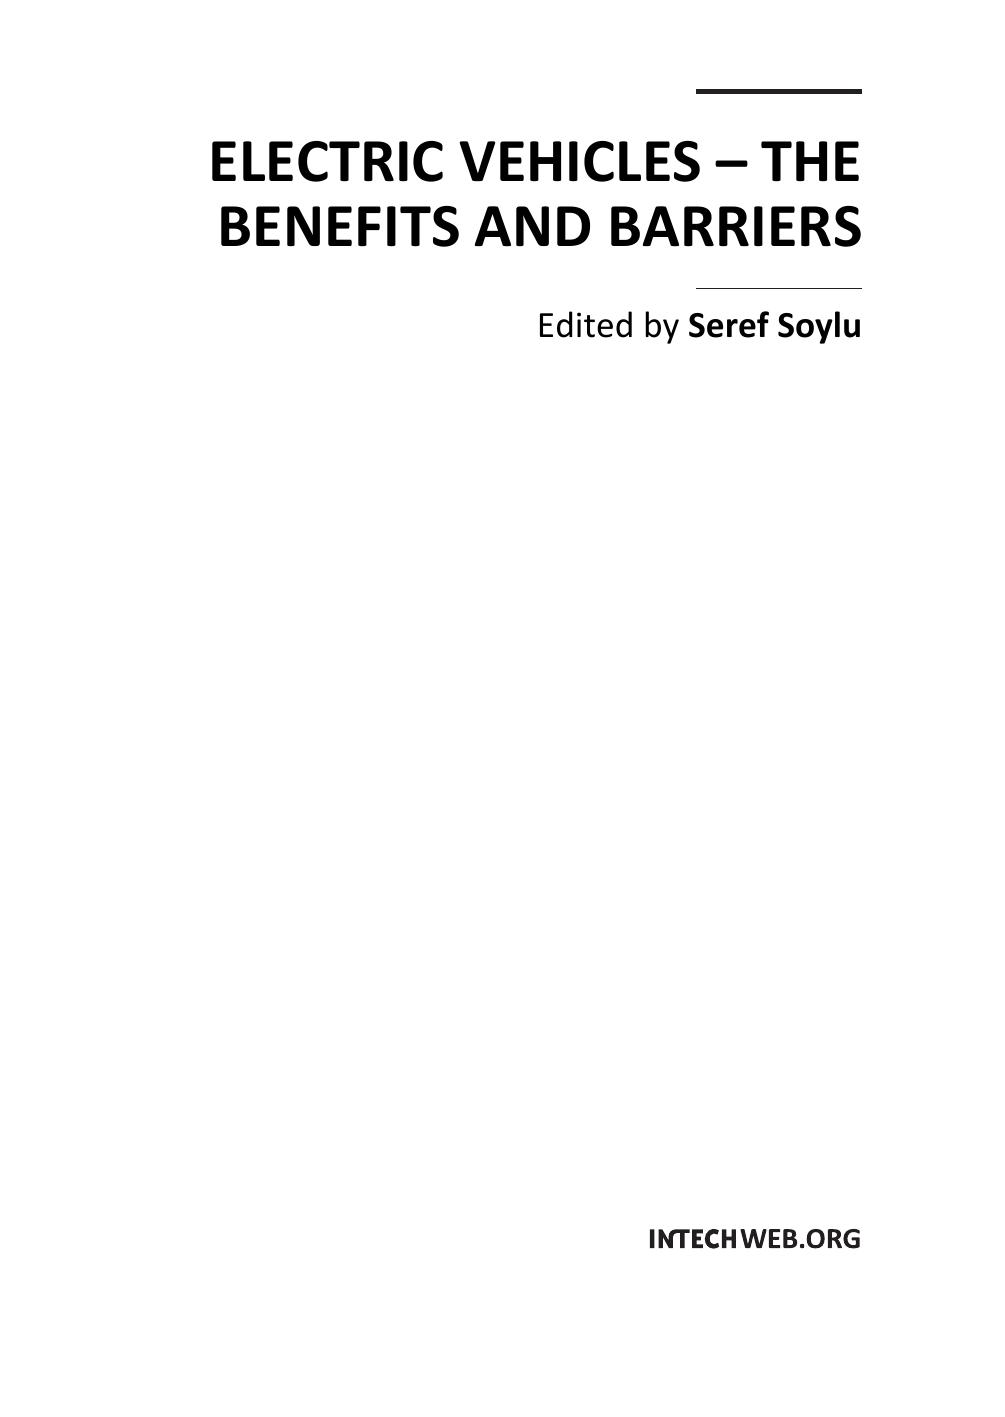 Electric Vehicles     The Benefits and Barriers 2011.pdf